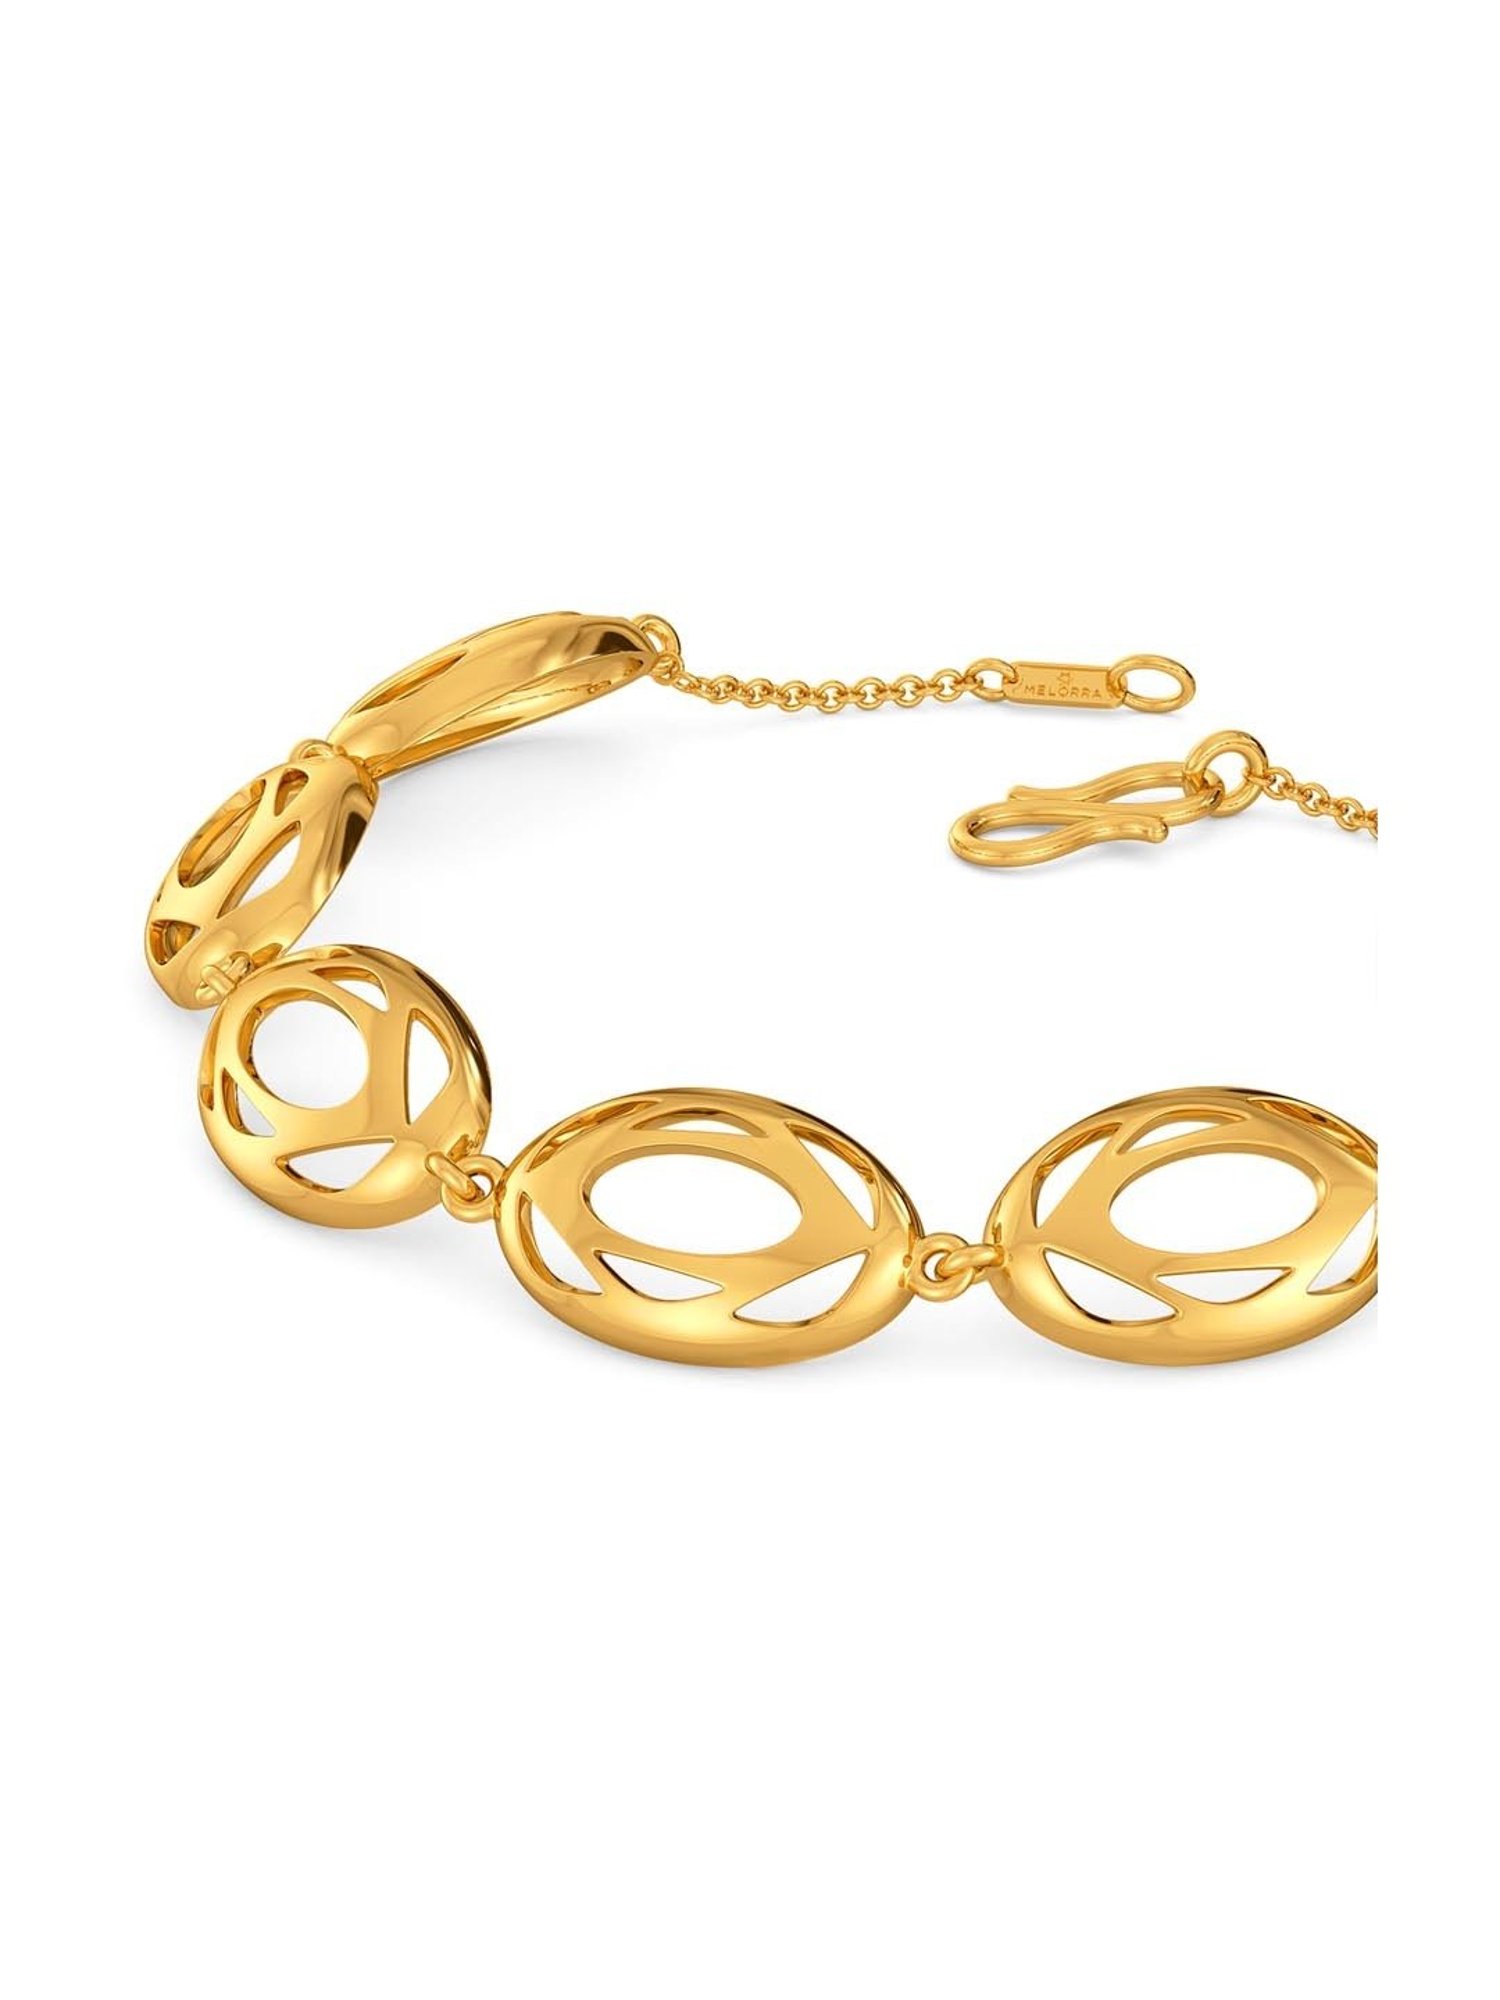 Latest Gold bangles Designs in 8 Grams - [New Models]